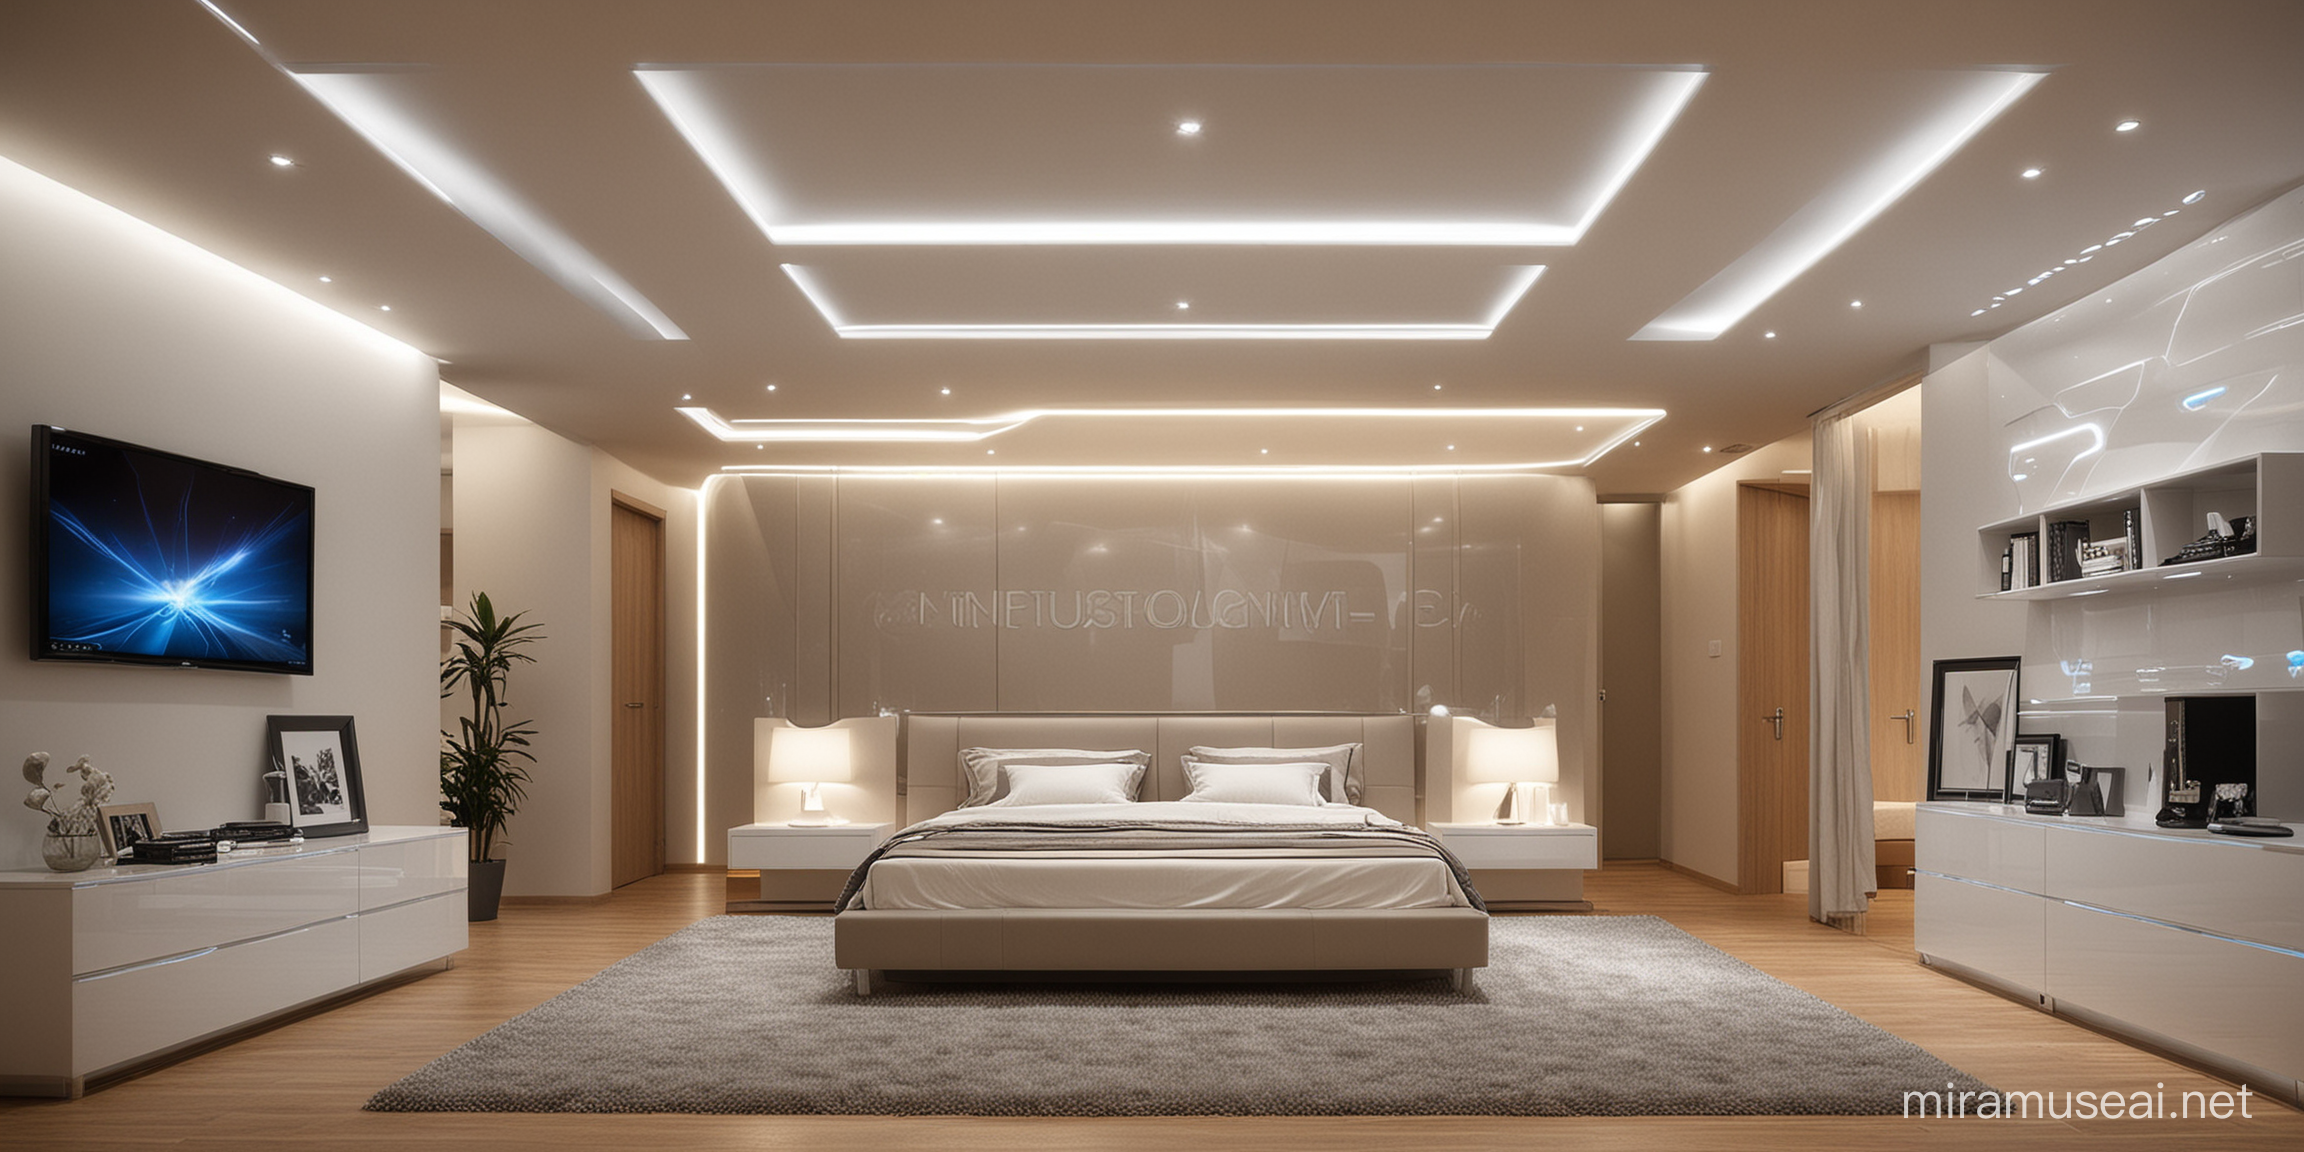 Futuristic Interior Bedroom with LED Ceiling Light